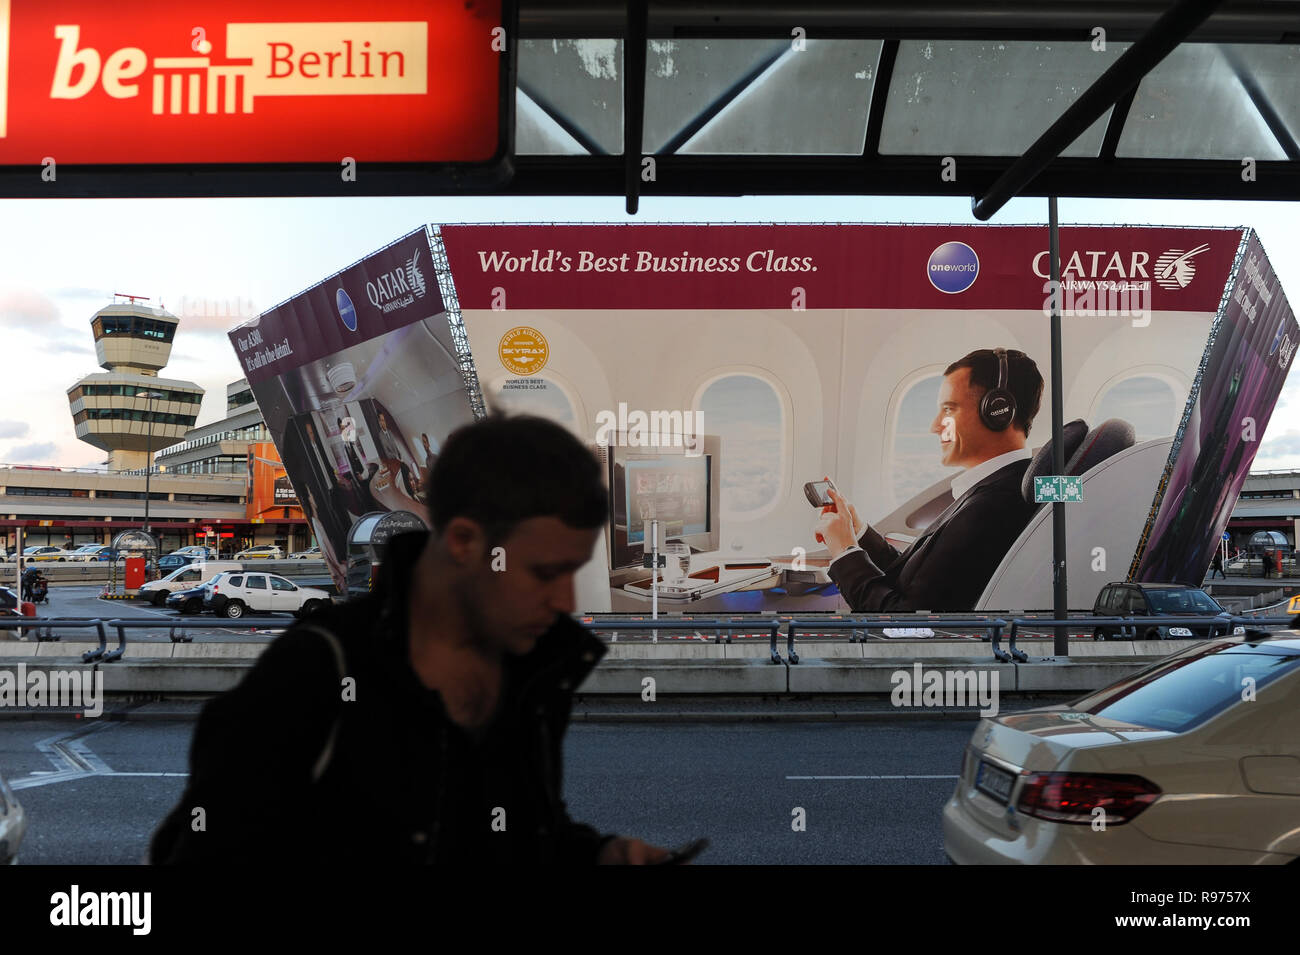 30.03.2015, Berlin, Germany, Europe - Billboard advertising for the business class of Qatar Airways at Berlin's Tegel Airport. Stock Photo